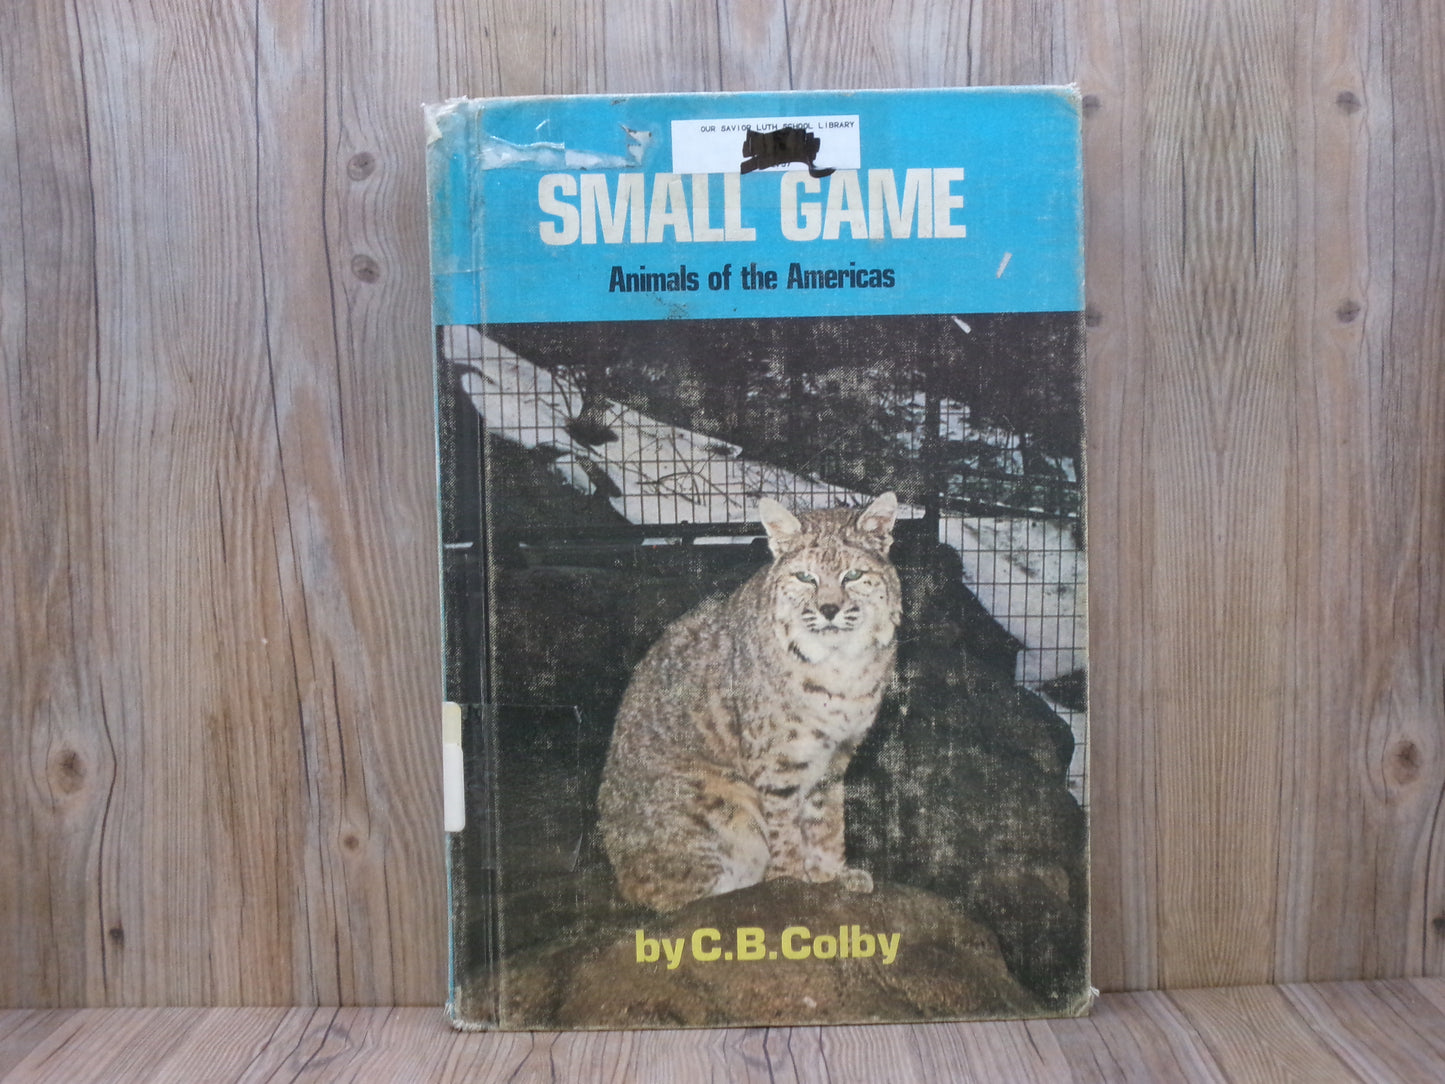 Small Game by C.B. Colby